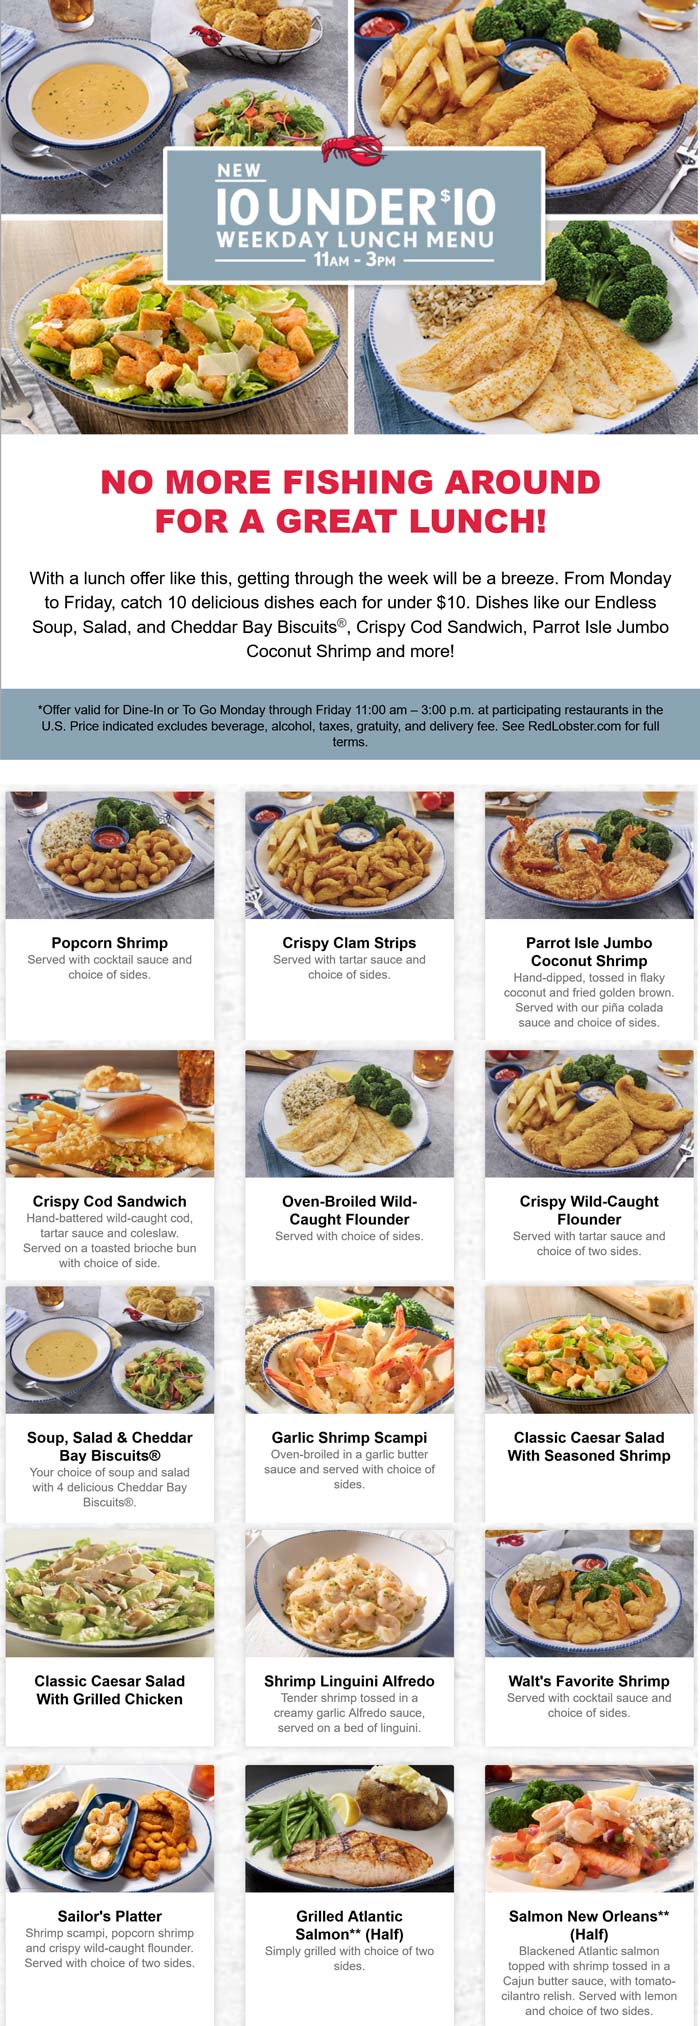 Red Lobster restaurants Coupon  10 weekday lunch entrees under $10 at Red Lobster #redlobster 